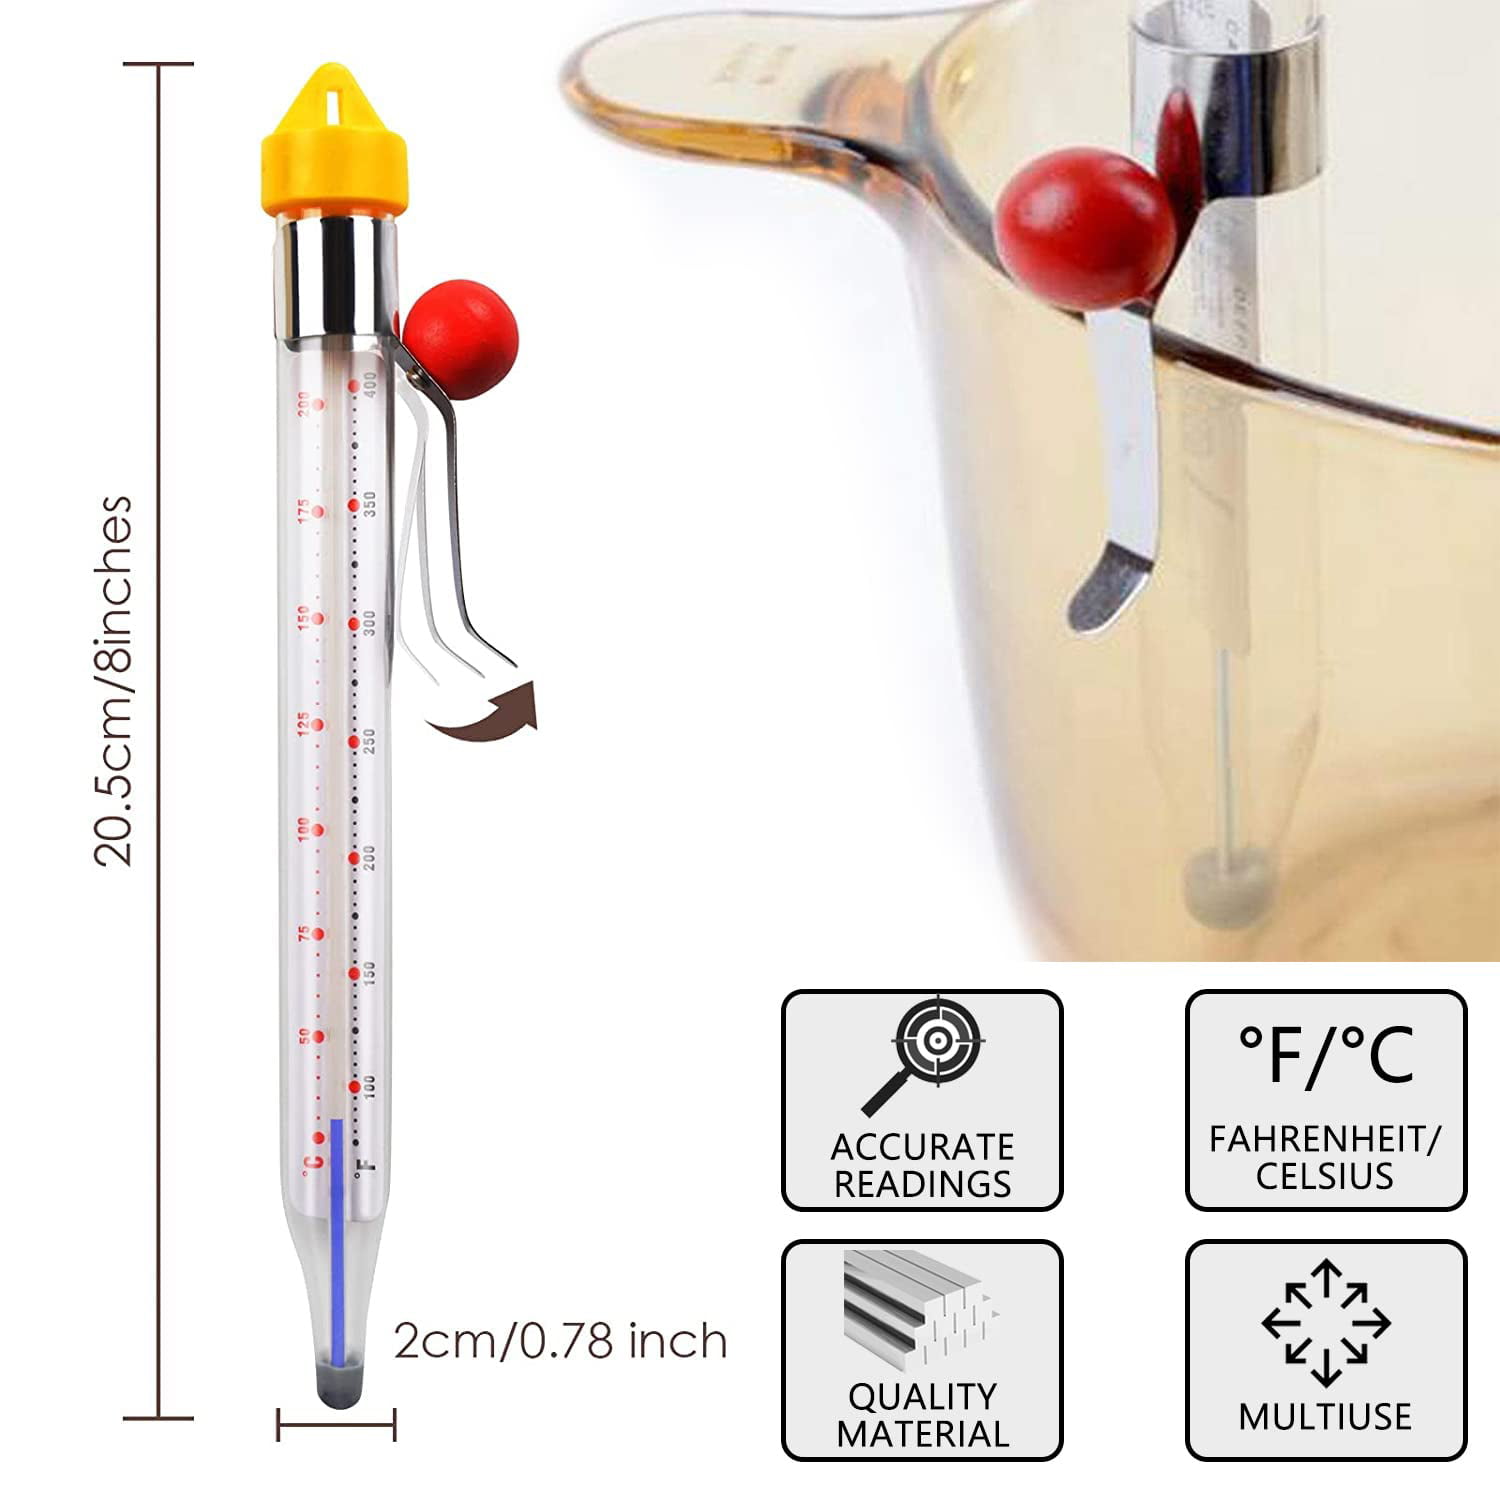 Home Made Sugar Thermometer for Cooking Candy or Jam, Deep Frying and  General Kitchen Use, Stainless Steel, 30.5 cm